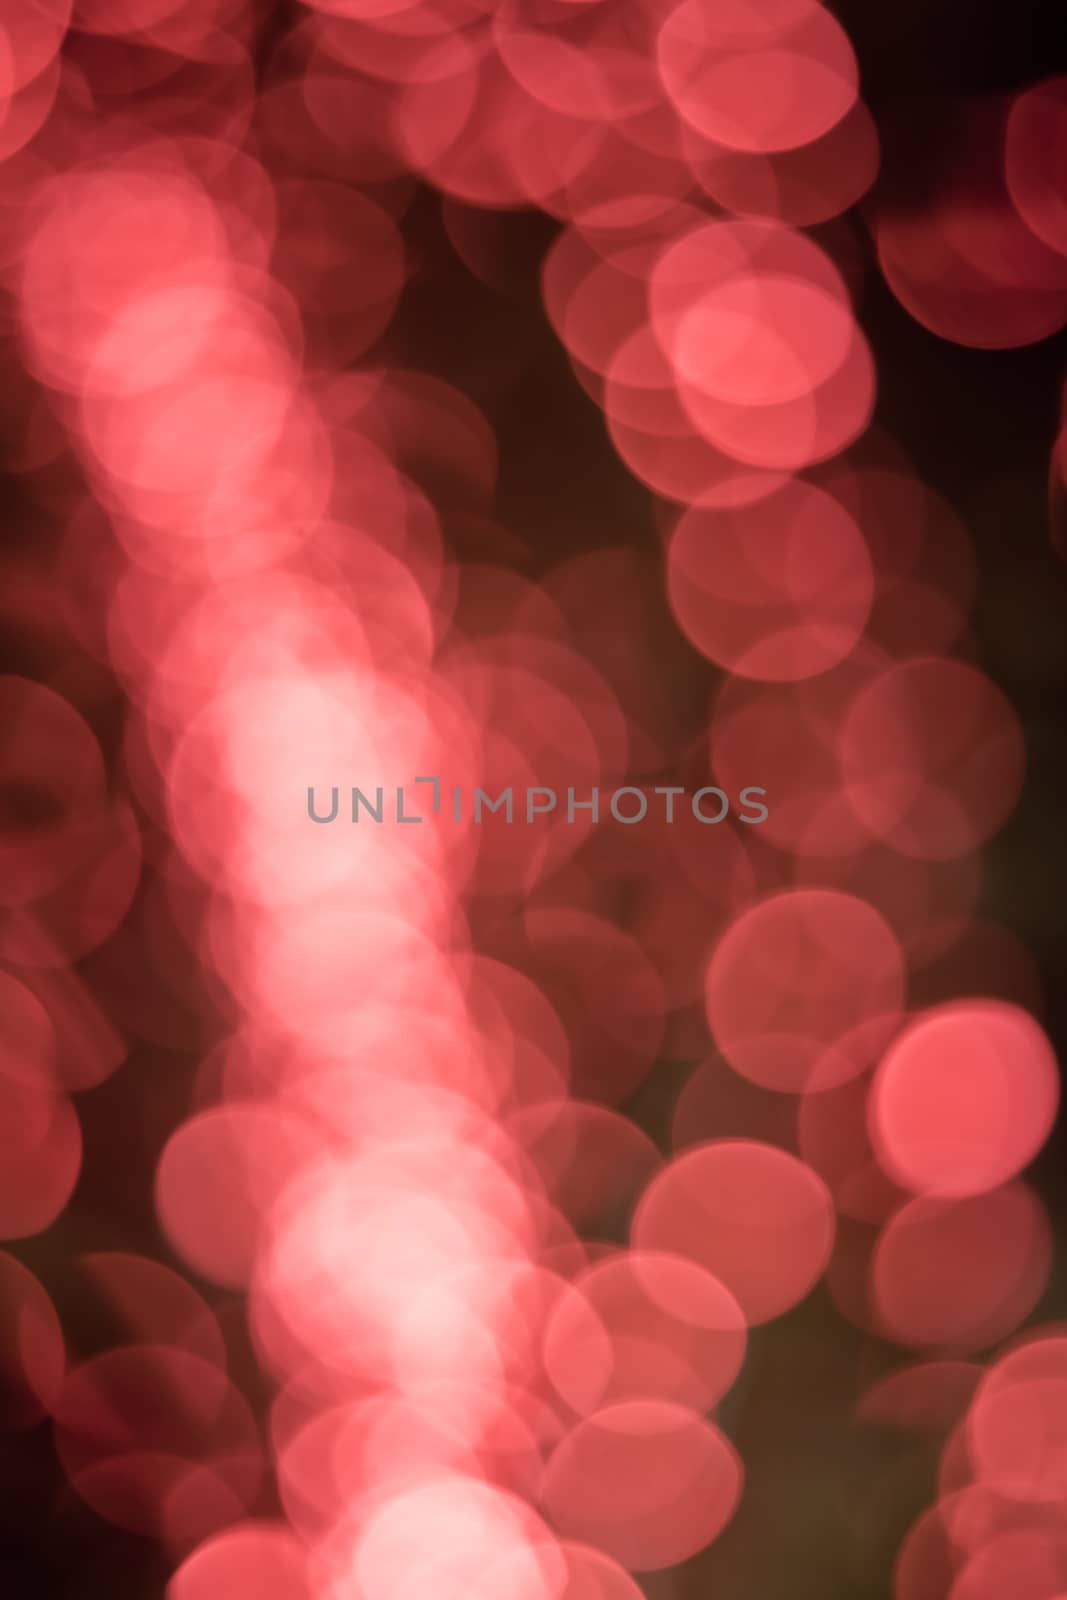 bokeh blurred out of focus background  by nikky1972